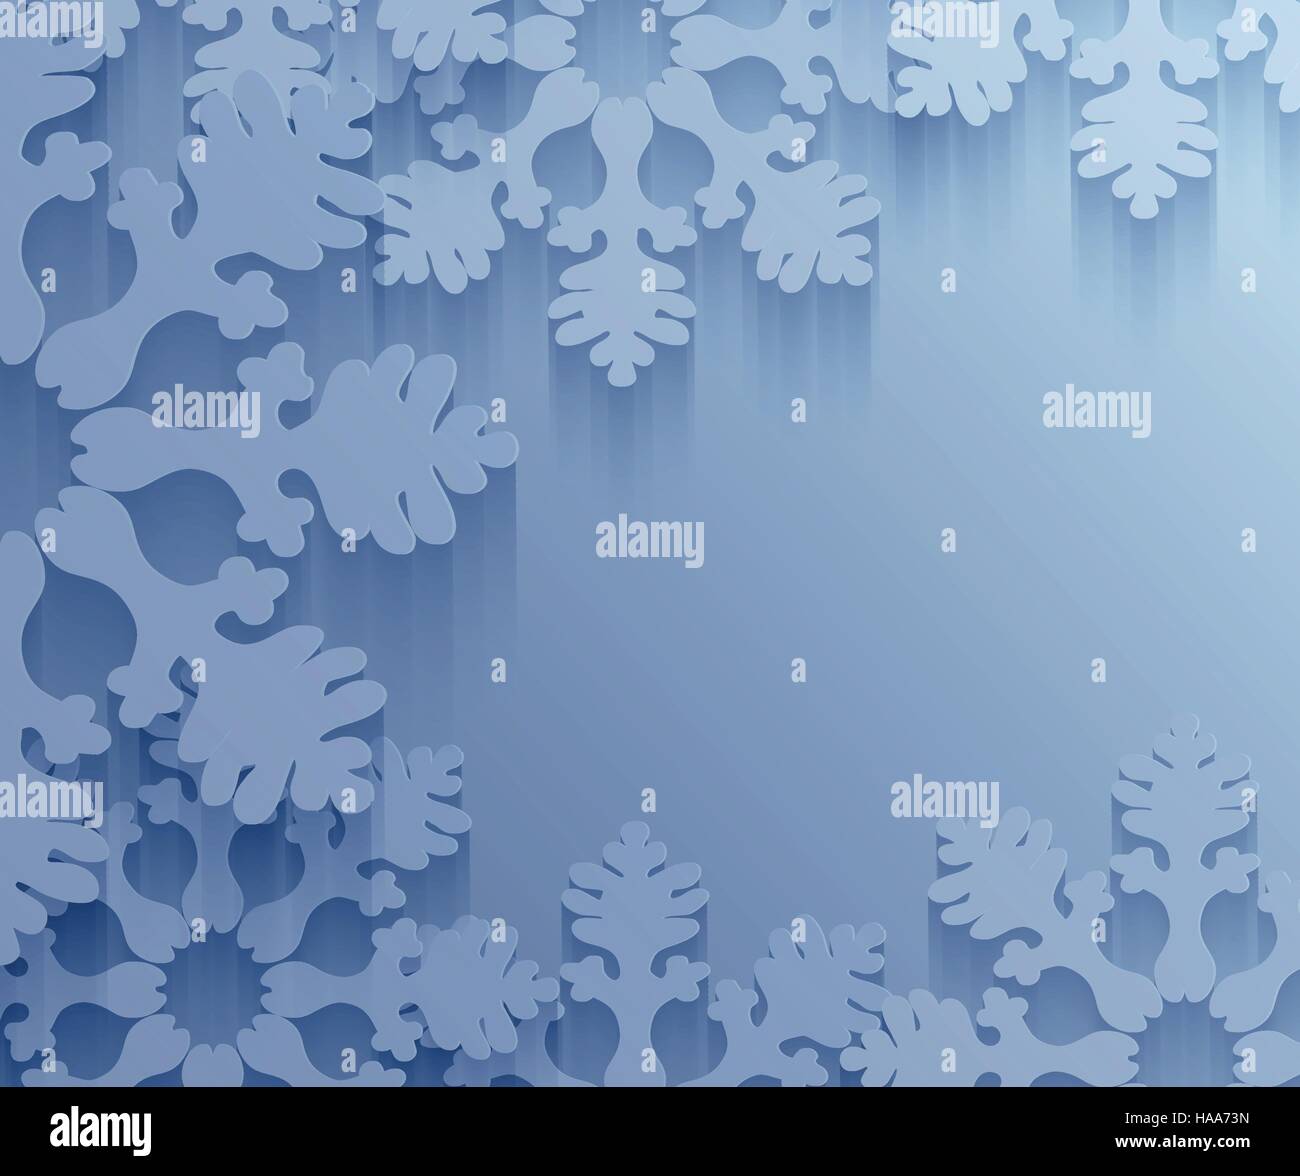 46,610 Snow Flakes On Glass Images, Stock Photos, 3D objects